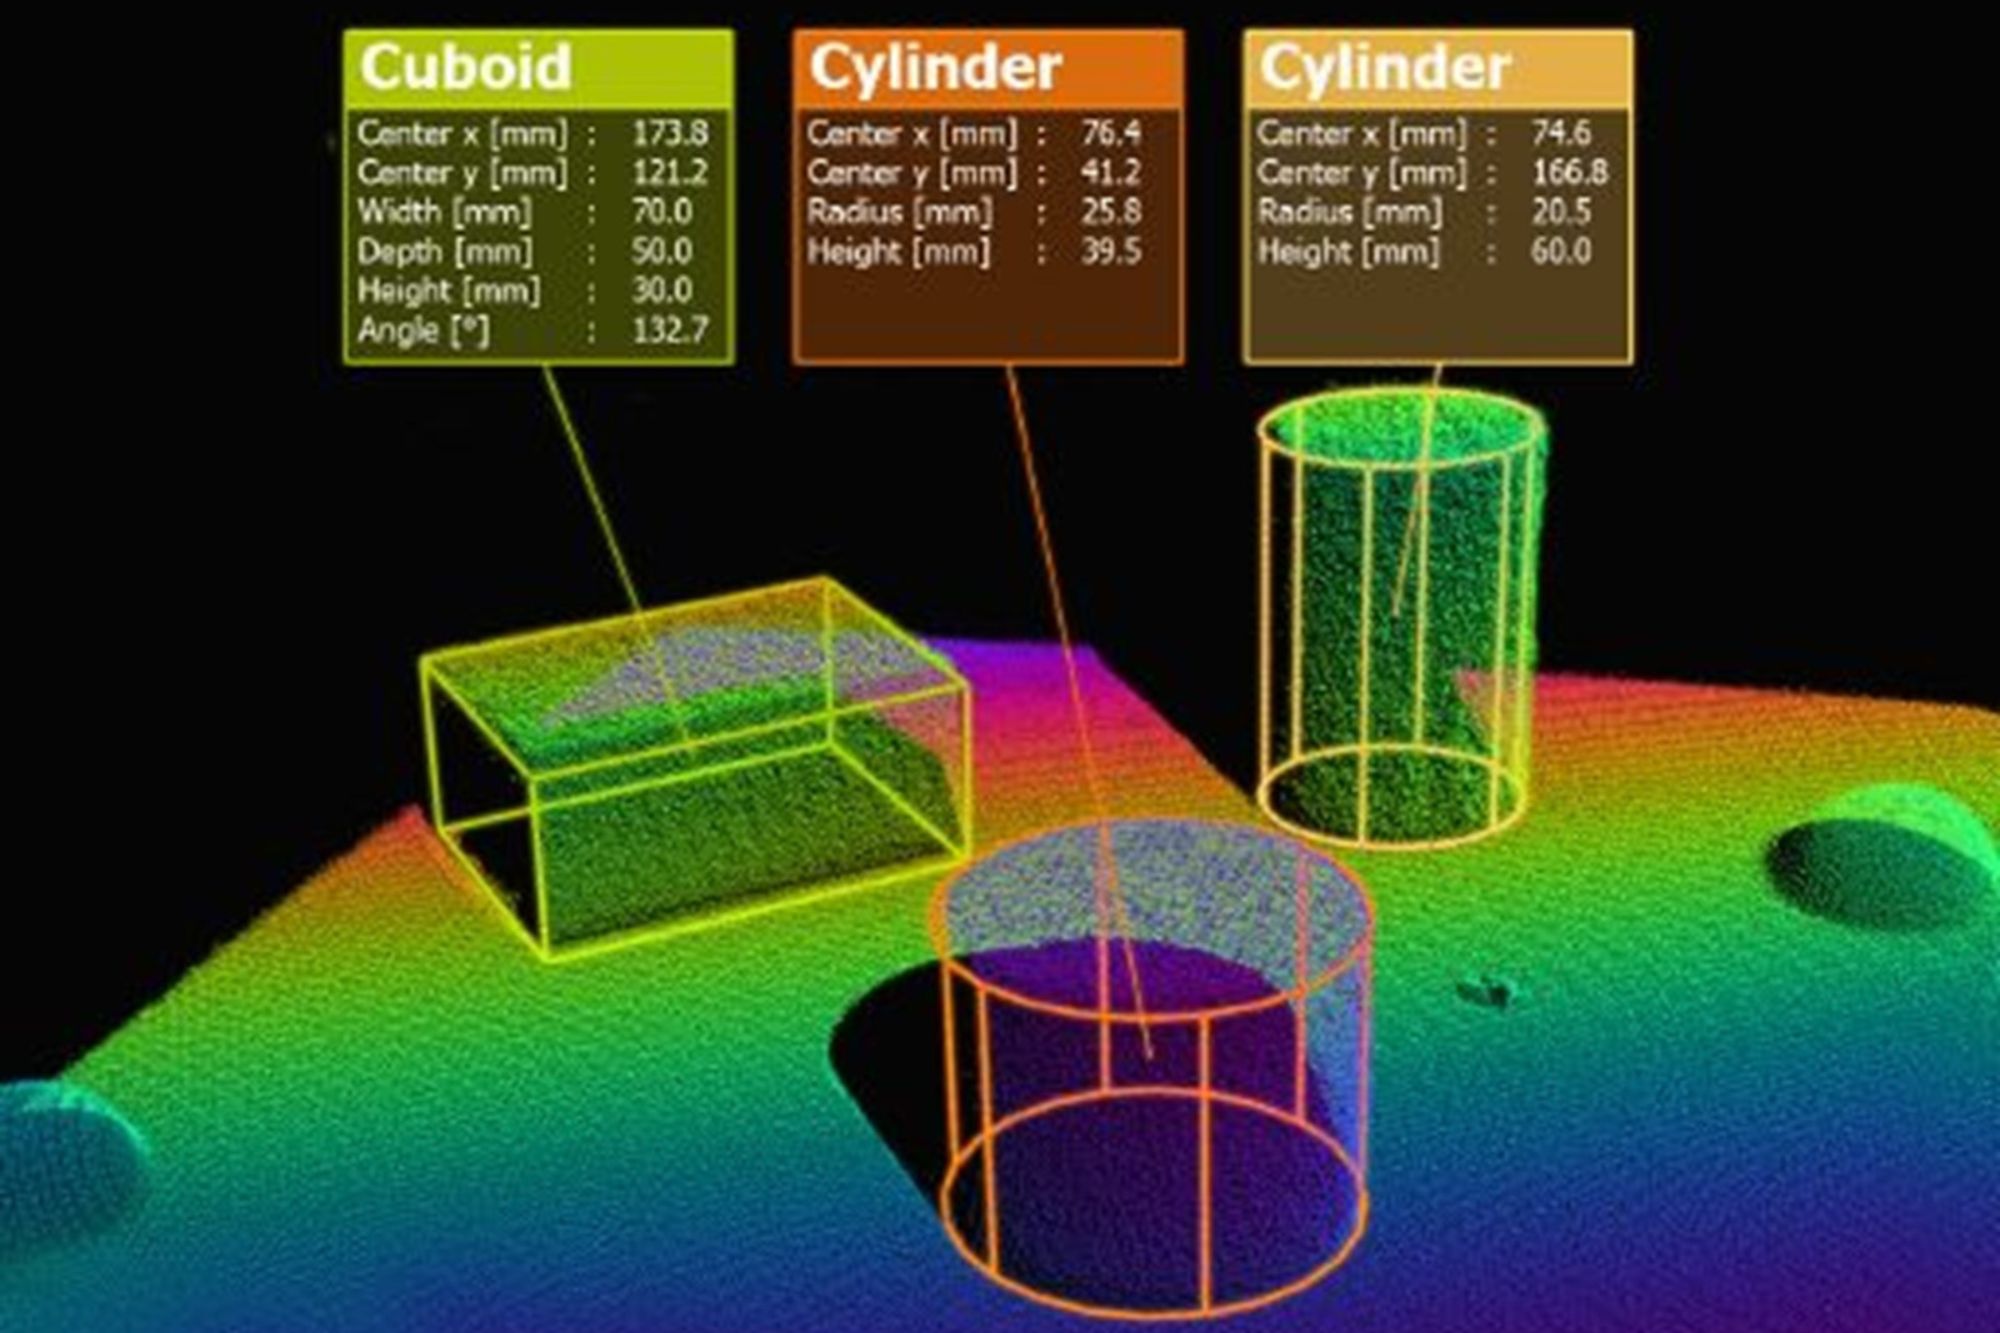 Software for the visualization and evaluation of 3D measurement data